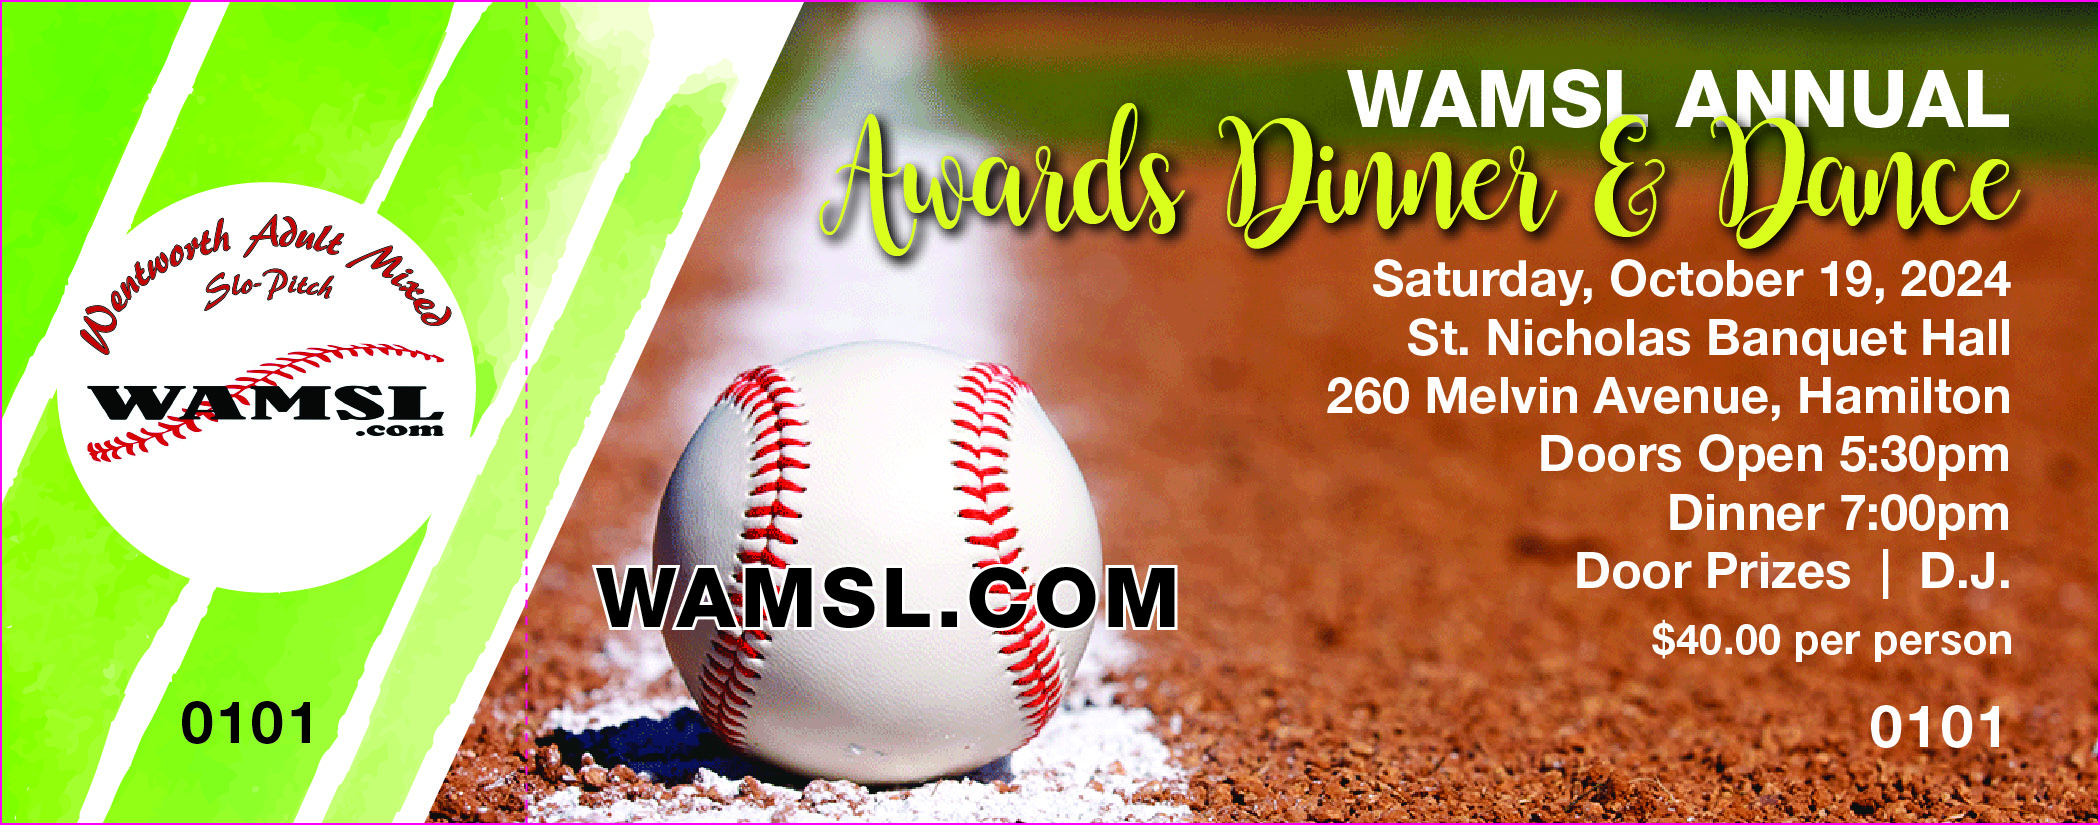 WAMSL 2022 Awards Dinner & Dance - Registration (2 tickets per team) -(Additional Team Tickets Are For Sale @ $40.00 per person) - Contact Linda info@wamsl.com